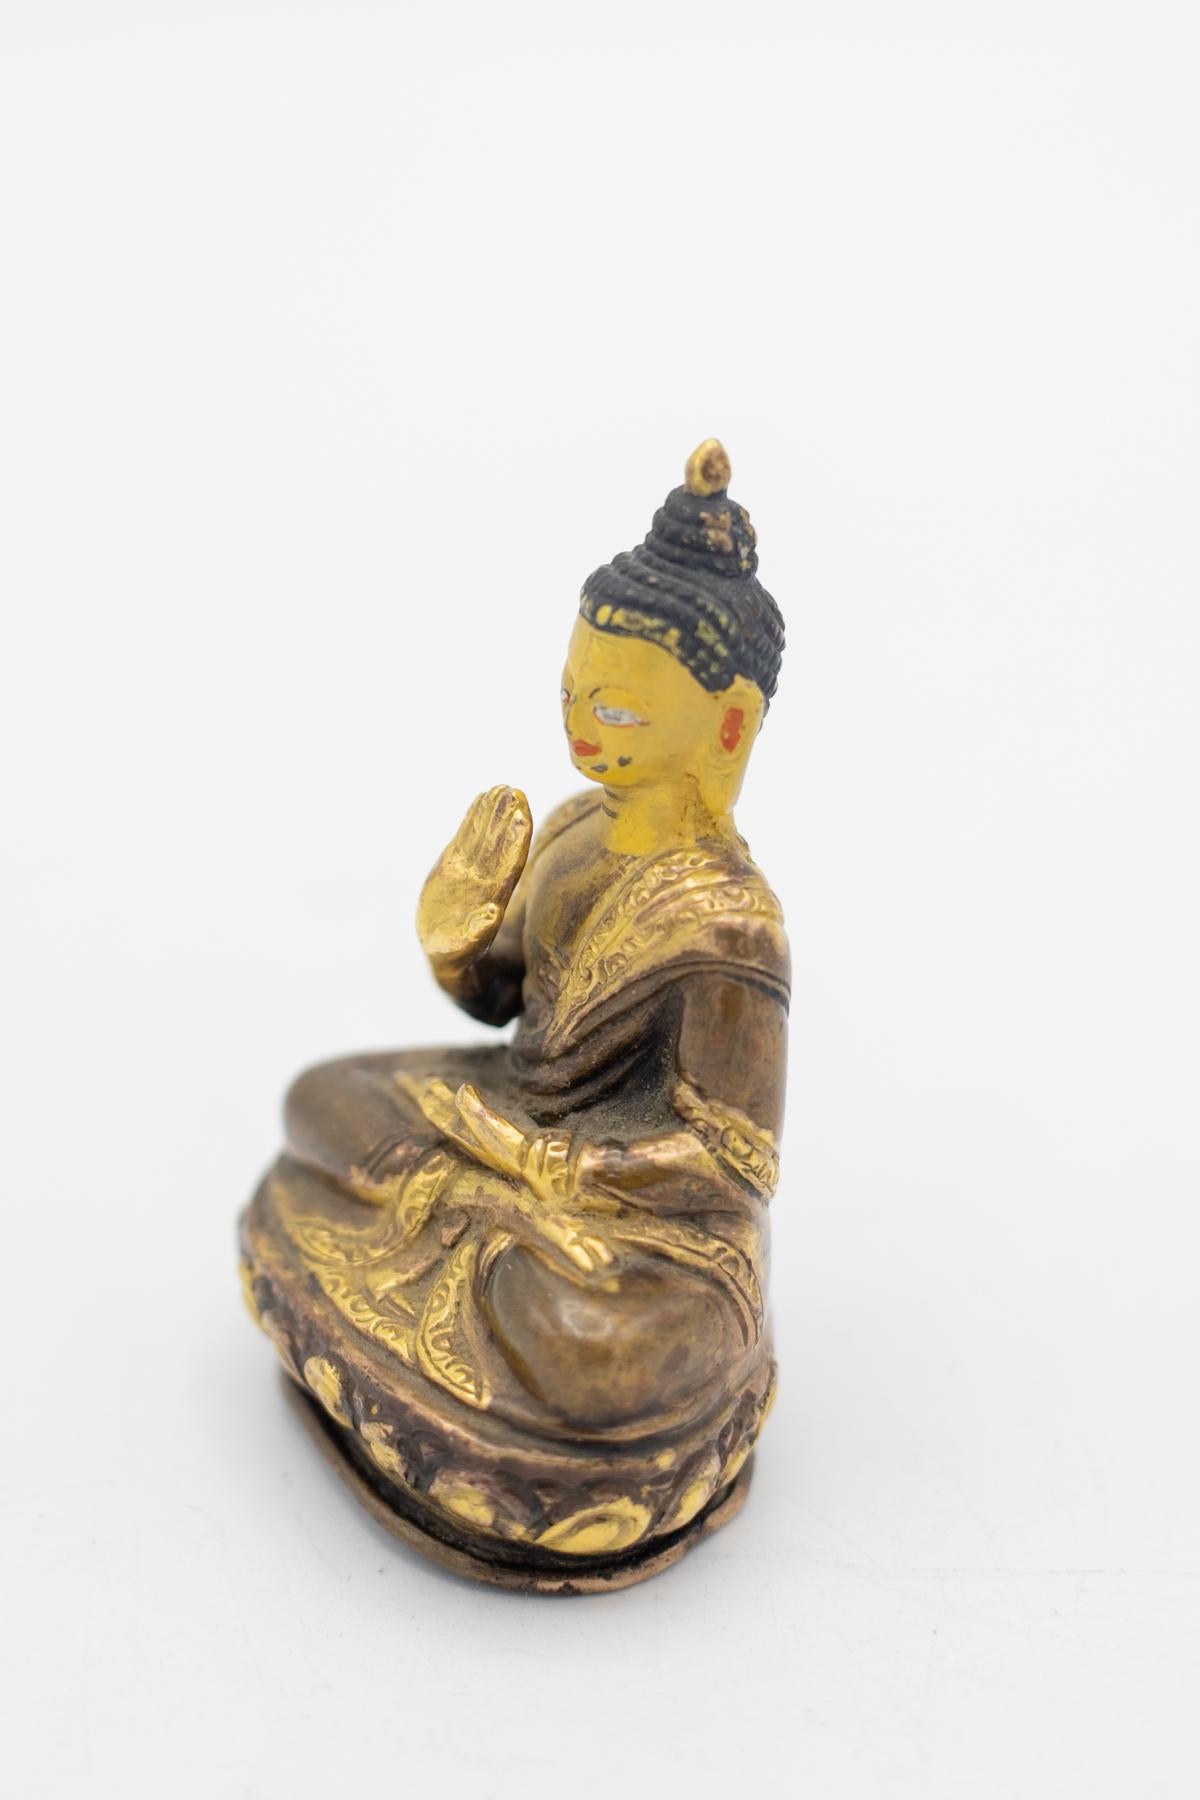 Rare 19th century Tibetan bronze statue depicting the Buddha in the 'blessing' position. He is depicted with a happy and relaxed expression, like the gaze of a carefree person who is doing good, rising above human nature.
This statue is ideal for